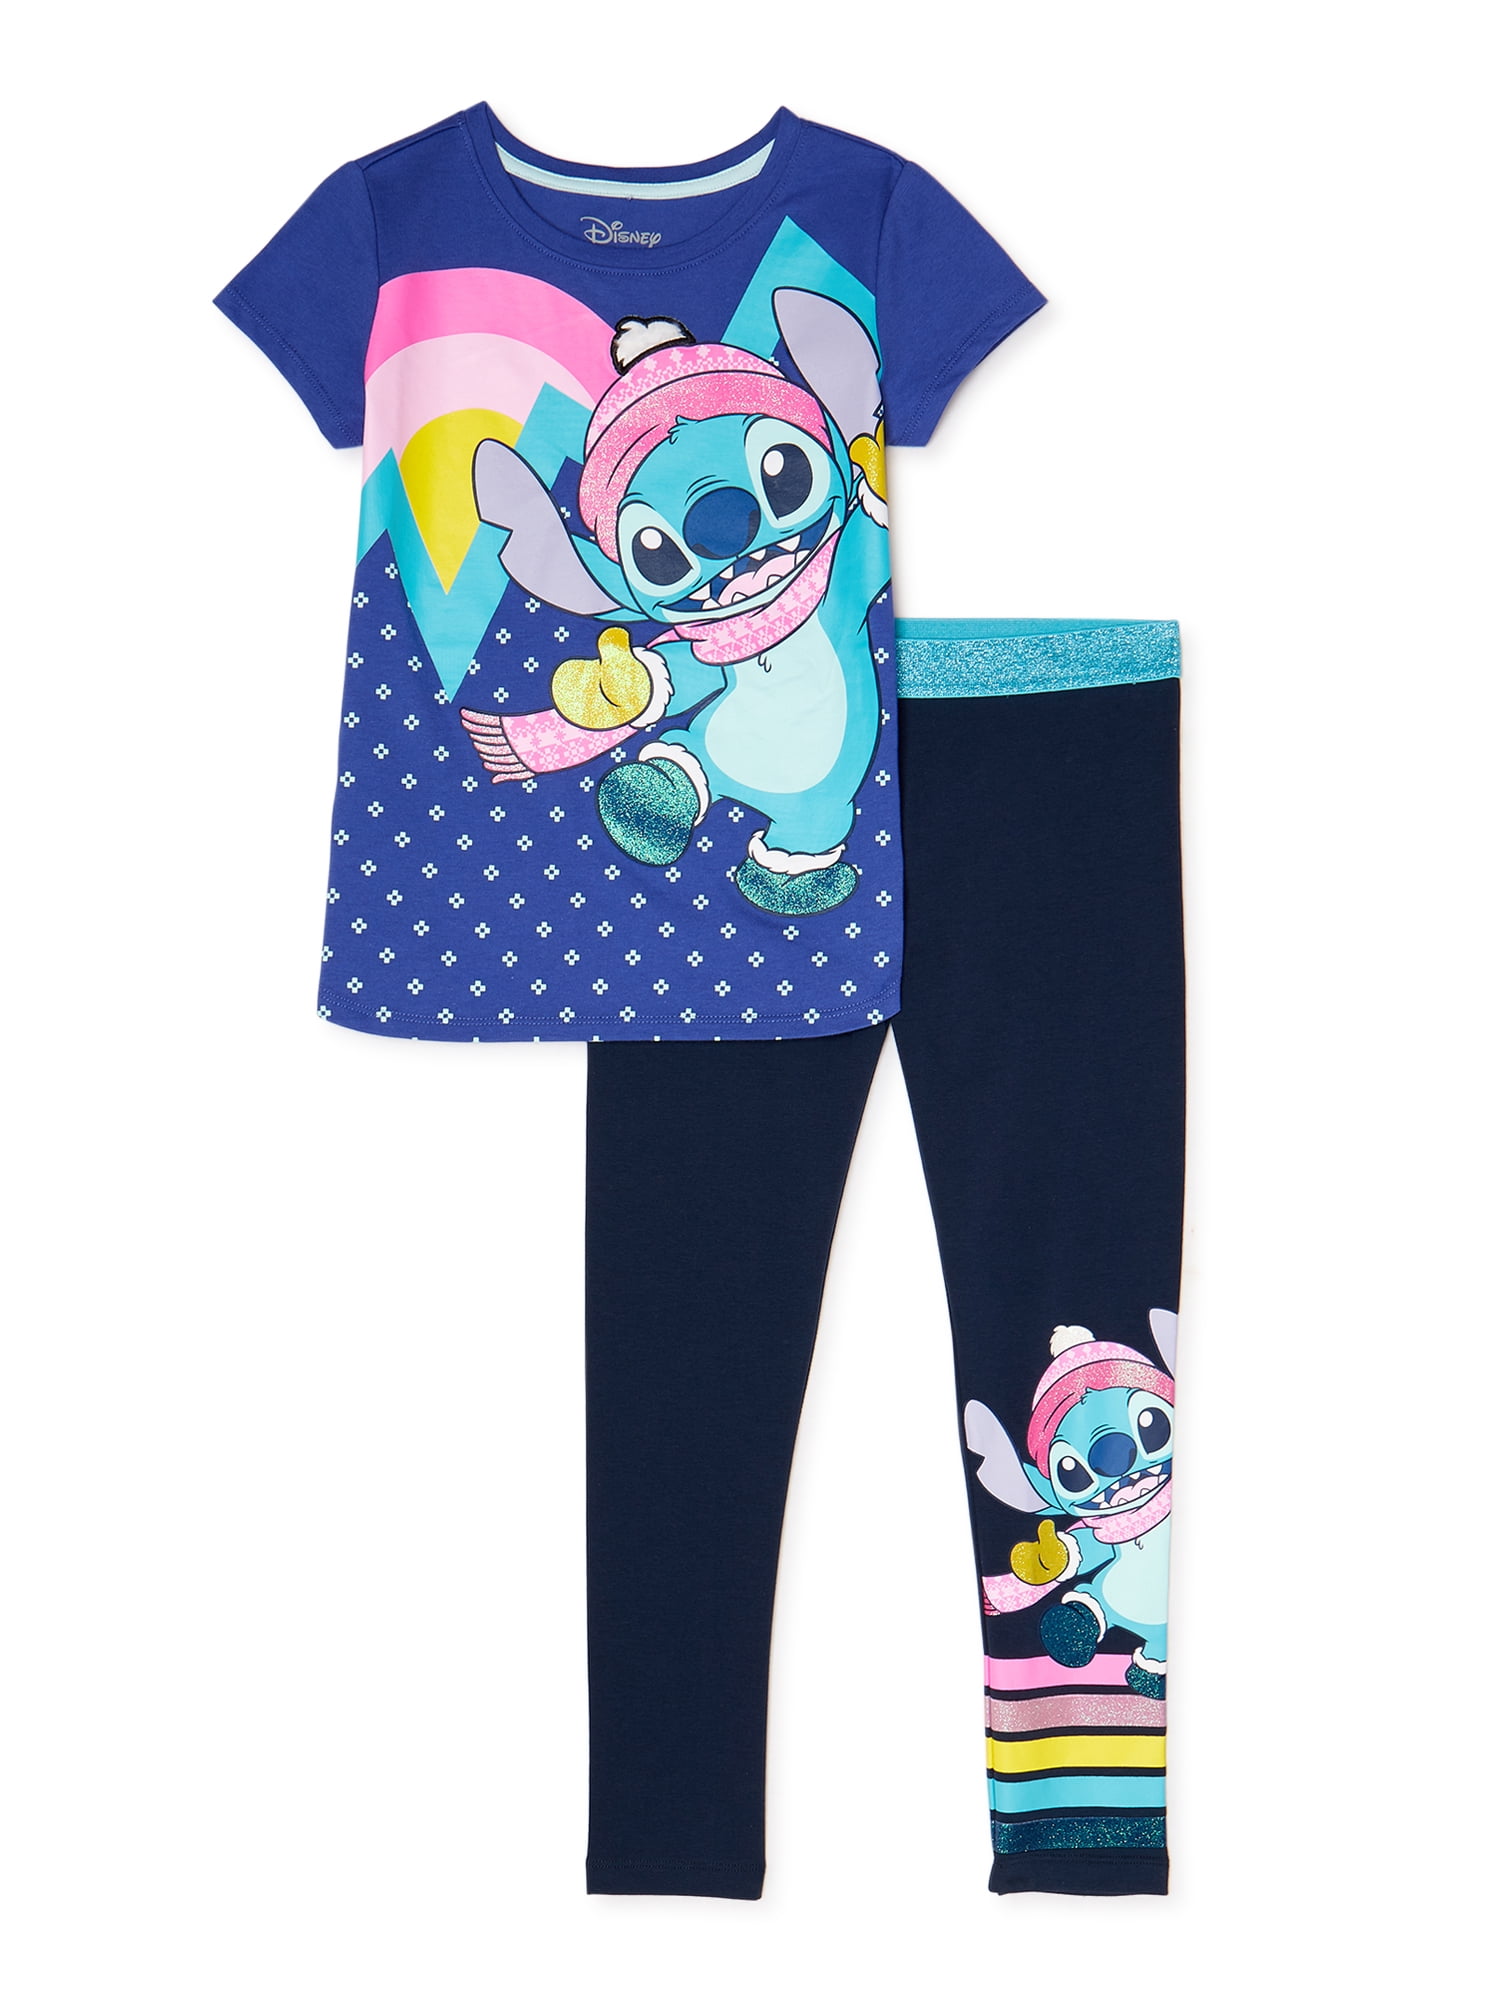 Disney Lilo & Stitch Girls Graphic Top and Leggings Outfit Set, 2-Piece ...